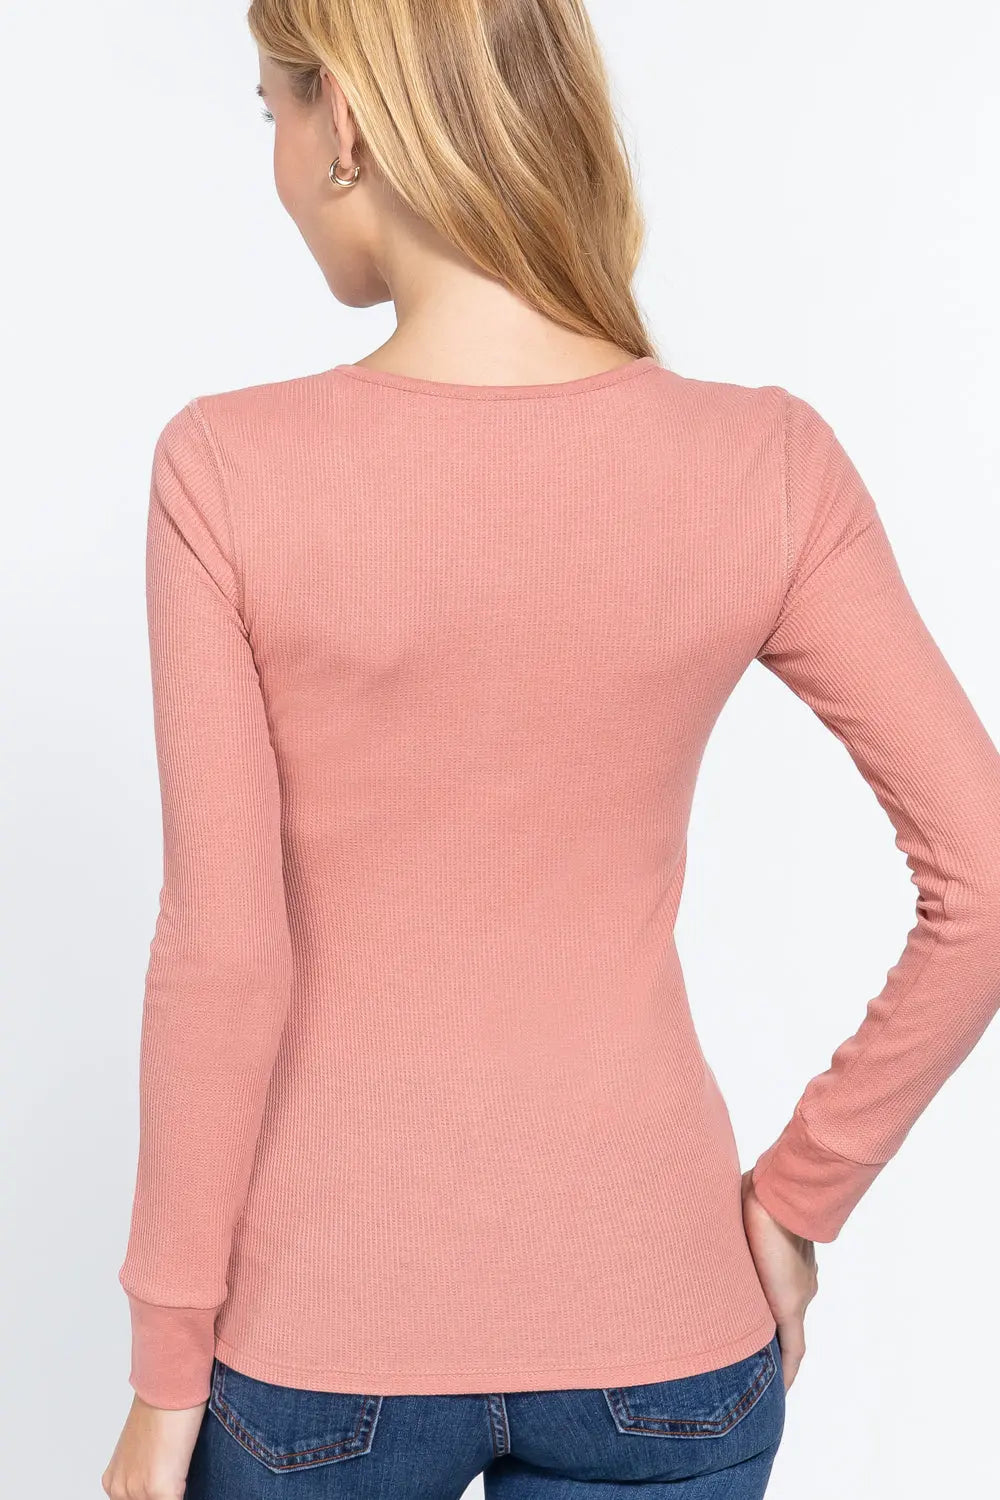 Long Slv Scoop Neck Thermal Top Sunny EvE Fashion